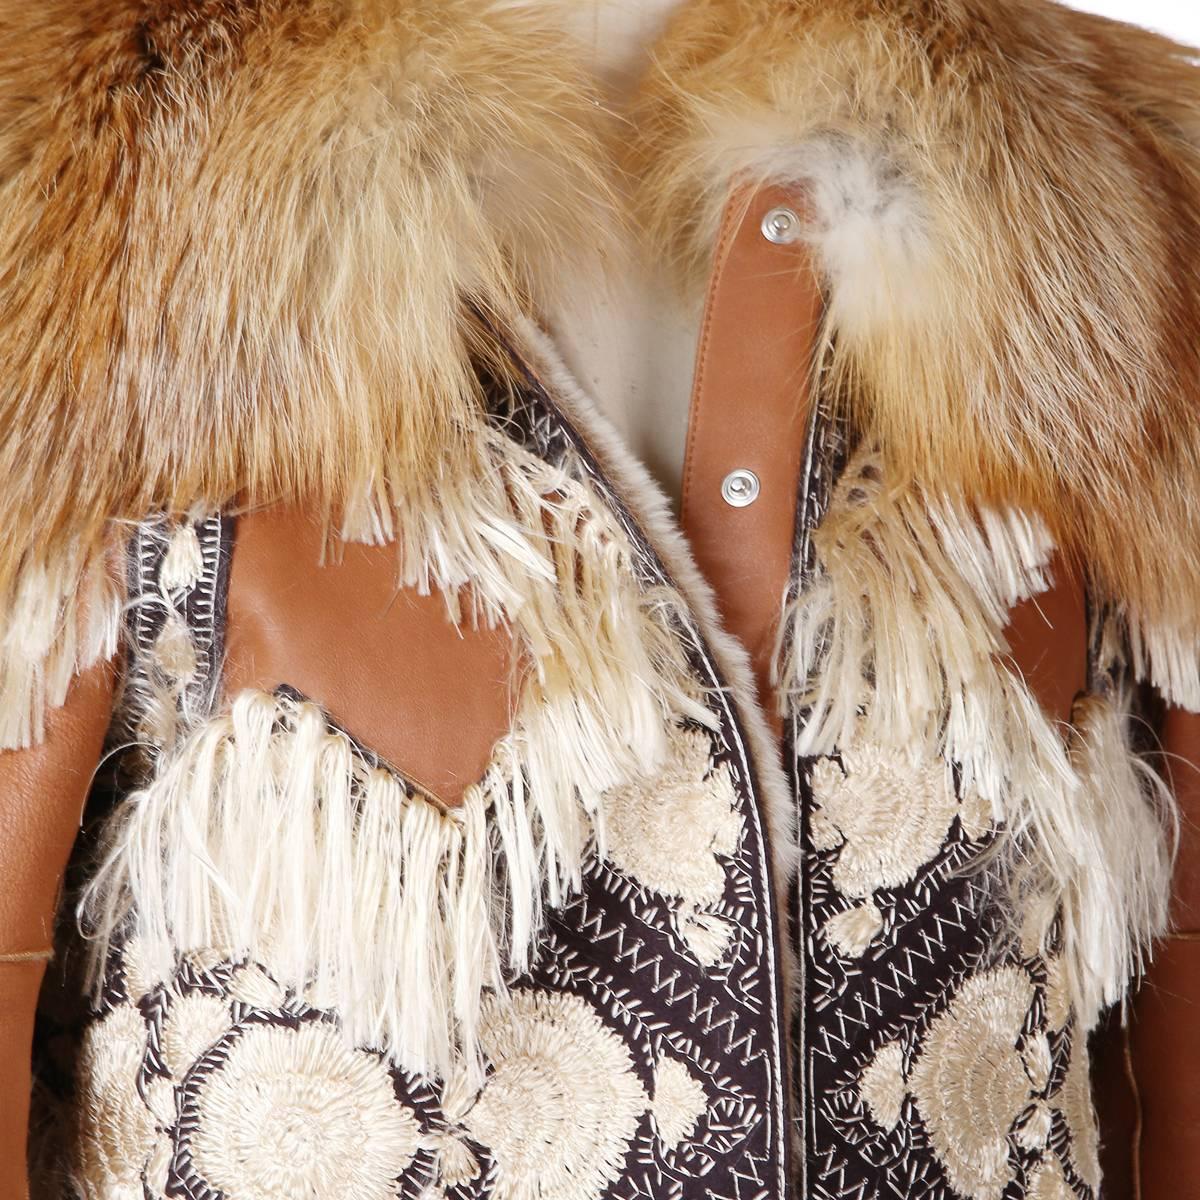 Brown Tan Leather Coat with Embroidery, Fringe, and Fur Collar, Fall 2016